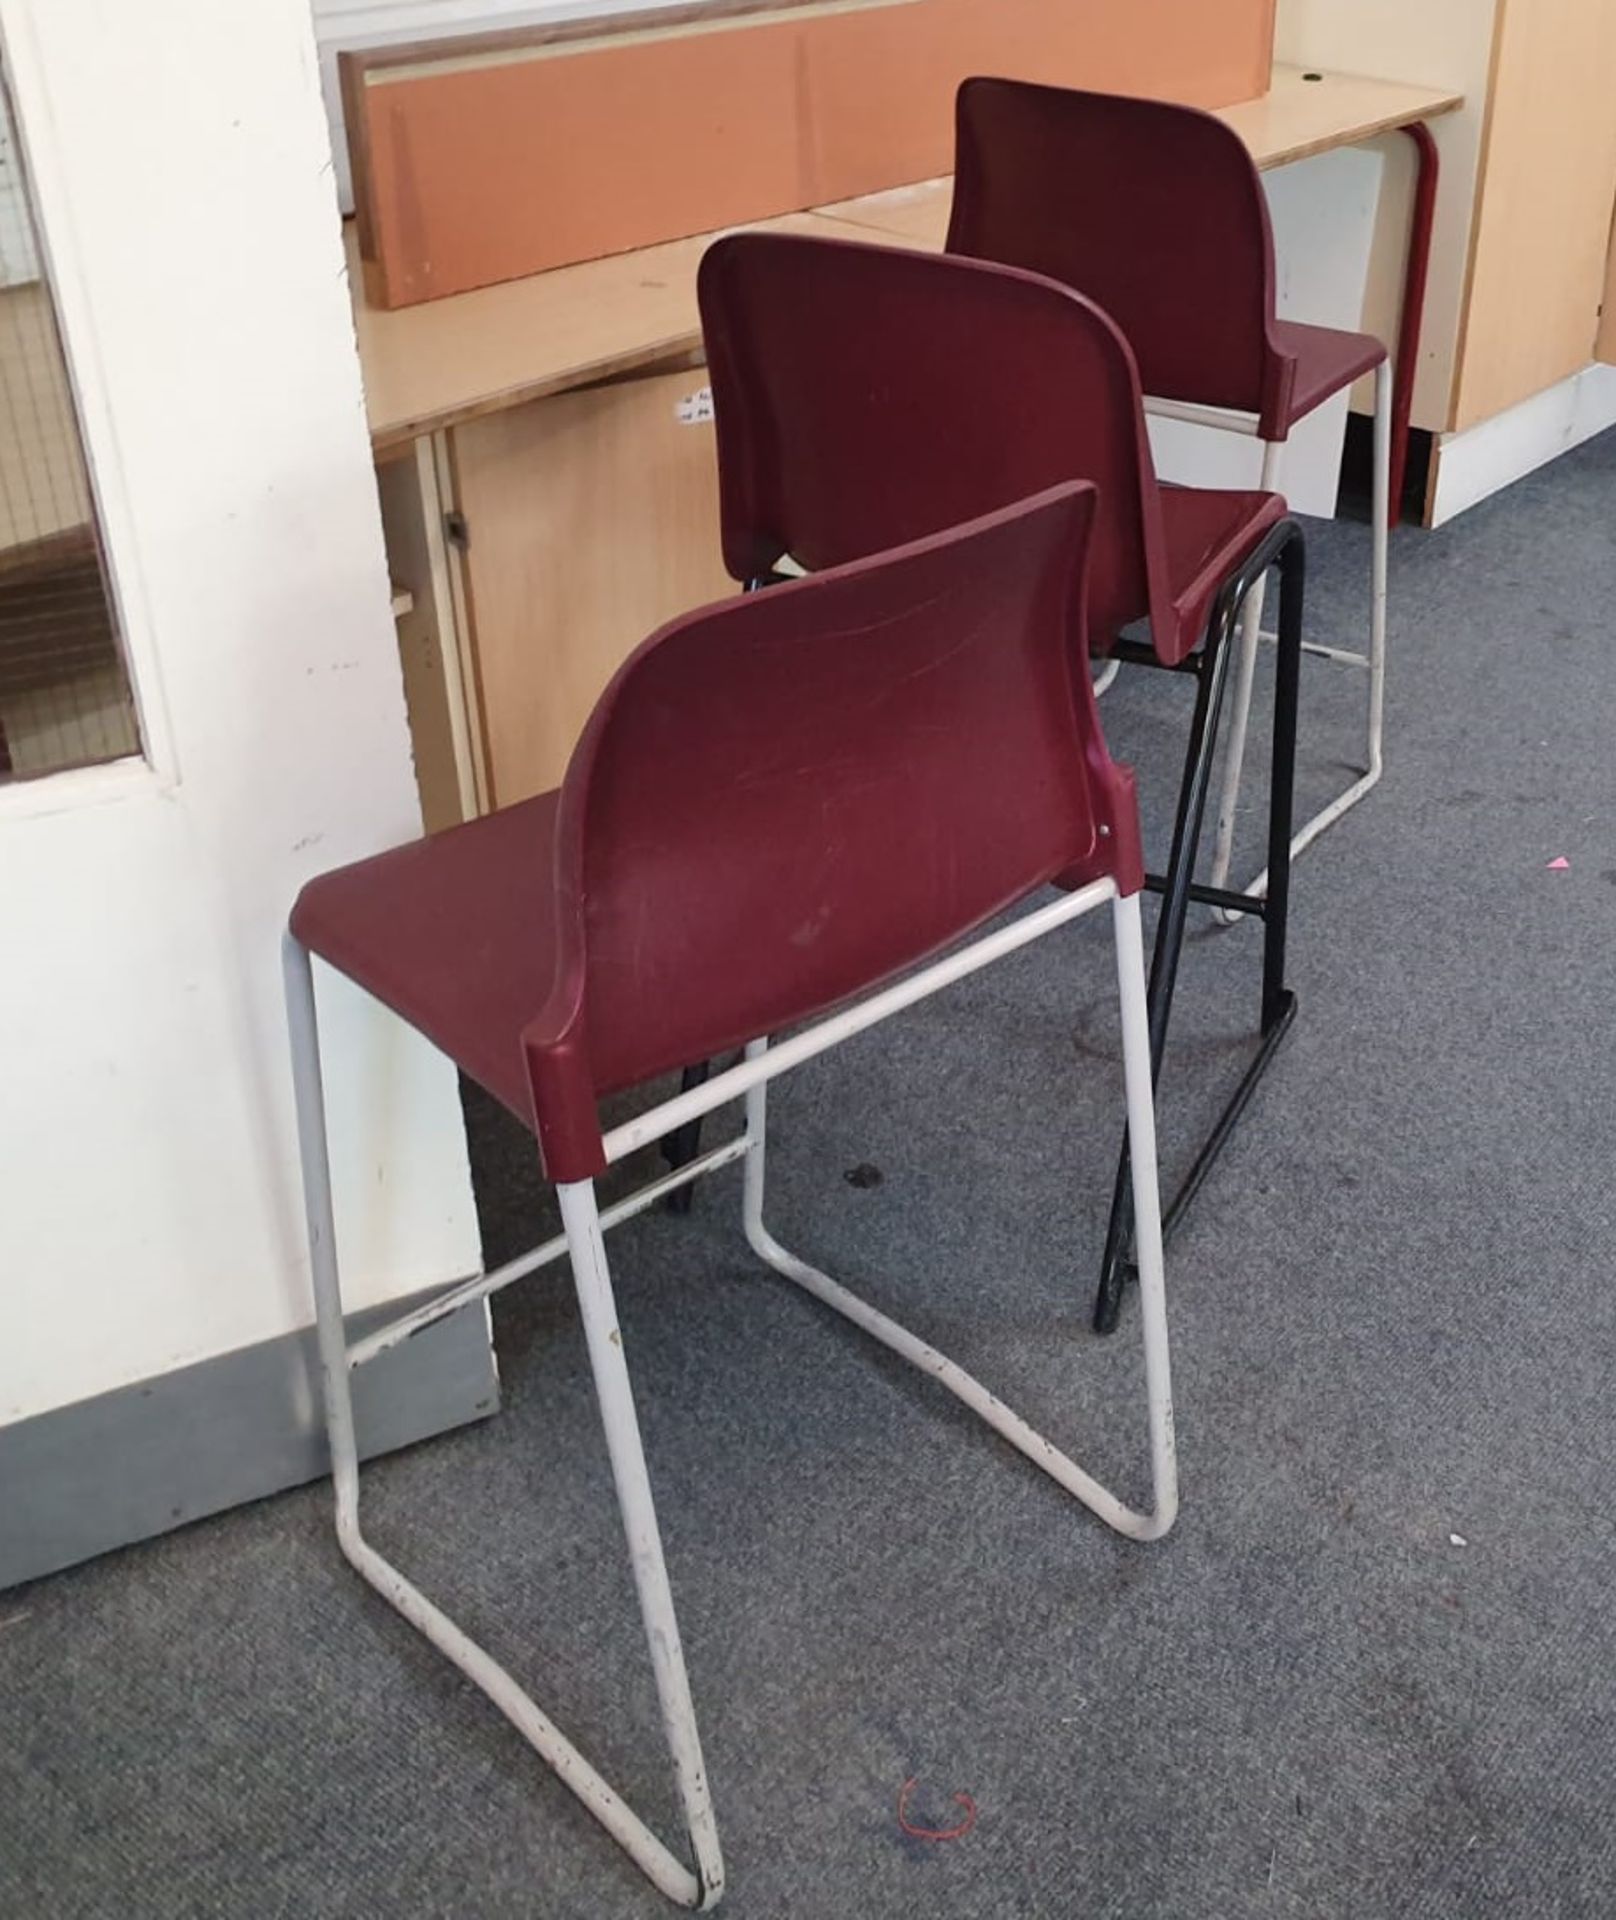 Approx 80 x Various Plastic School Chairs - In Red and Black - CL499 - Location: Borehamwood - Image 3 of 6